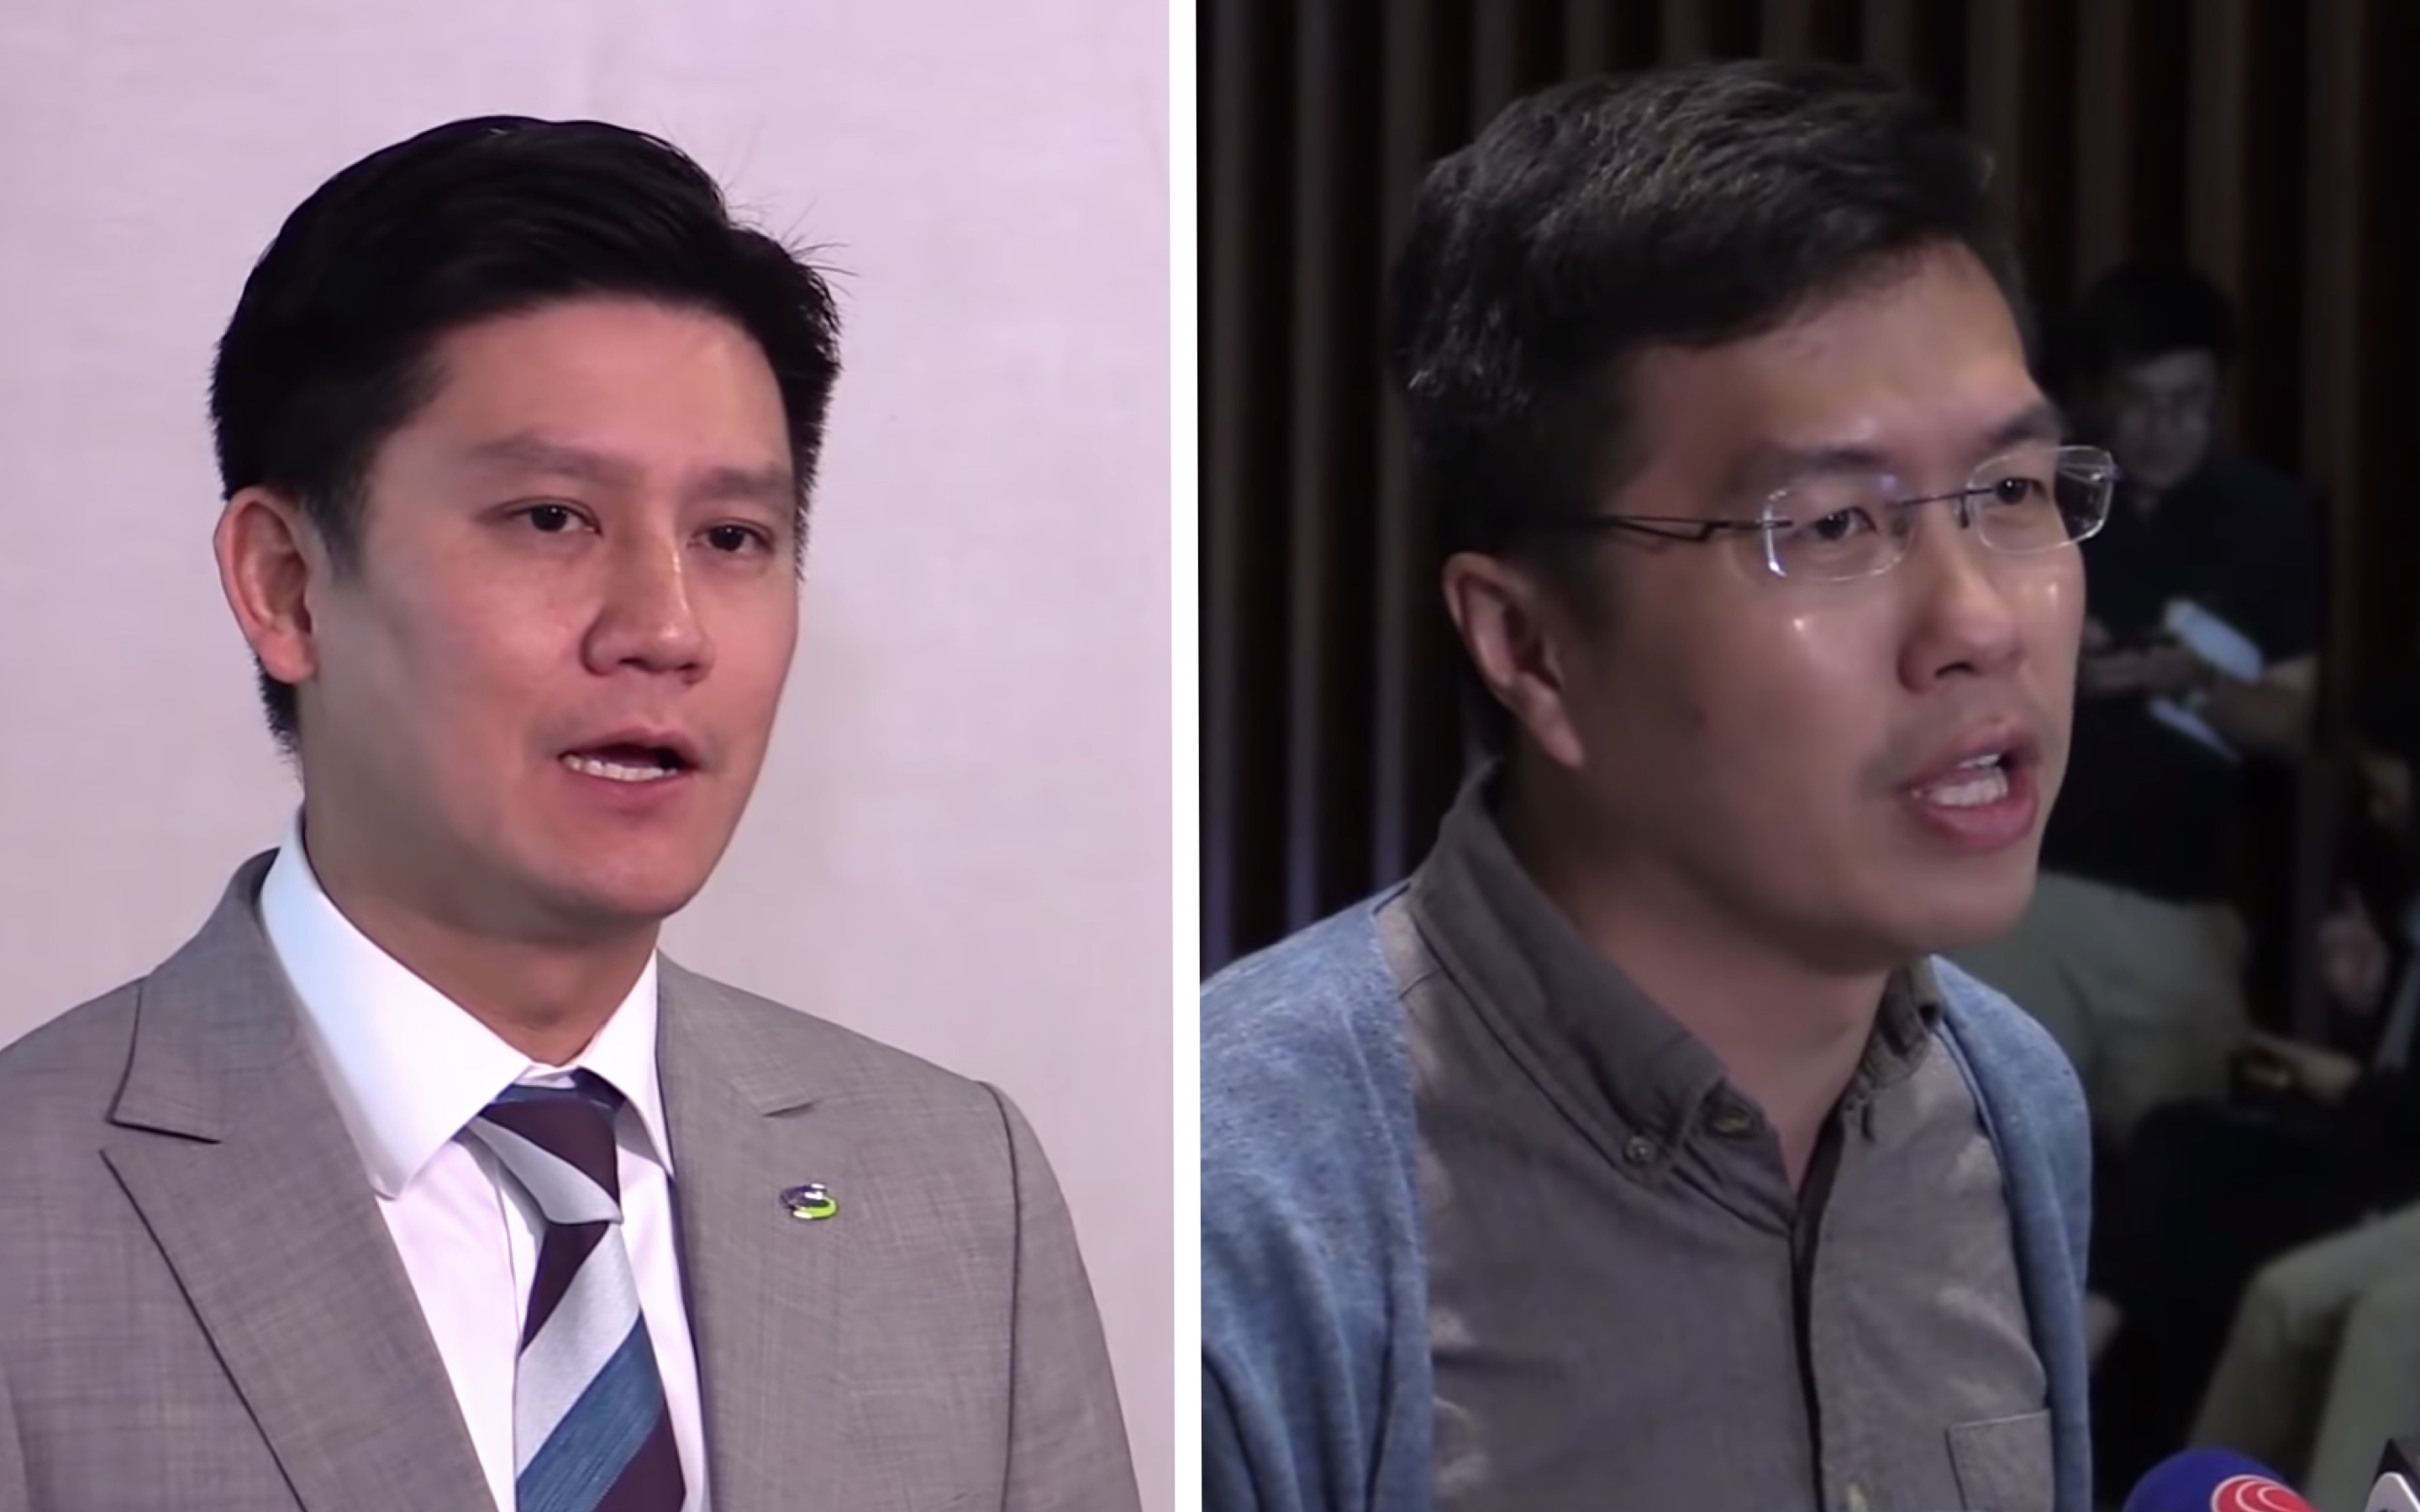 Pro-democracy lawmakers Jeremy Tam (left) and Au nok-hin (right) were arrested last night. The duo, who aren’t leaders of the current extradition bill protests, played a prominent role on the frontline trying to diffuse tensions between police and protesters. Screengrabs via YouTube.